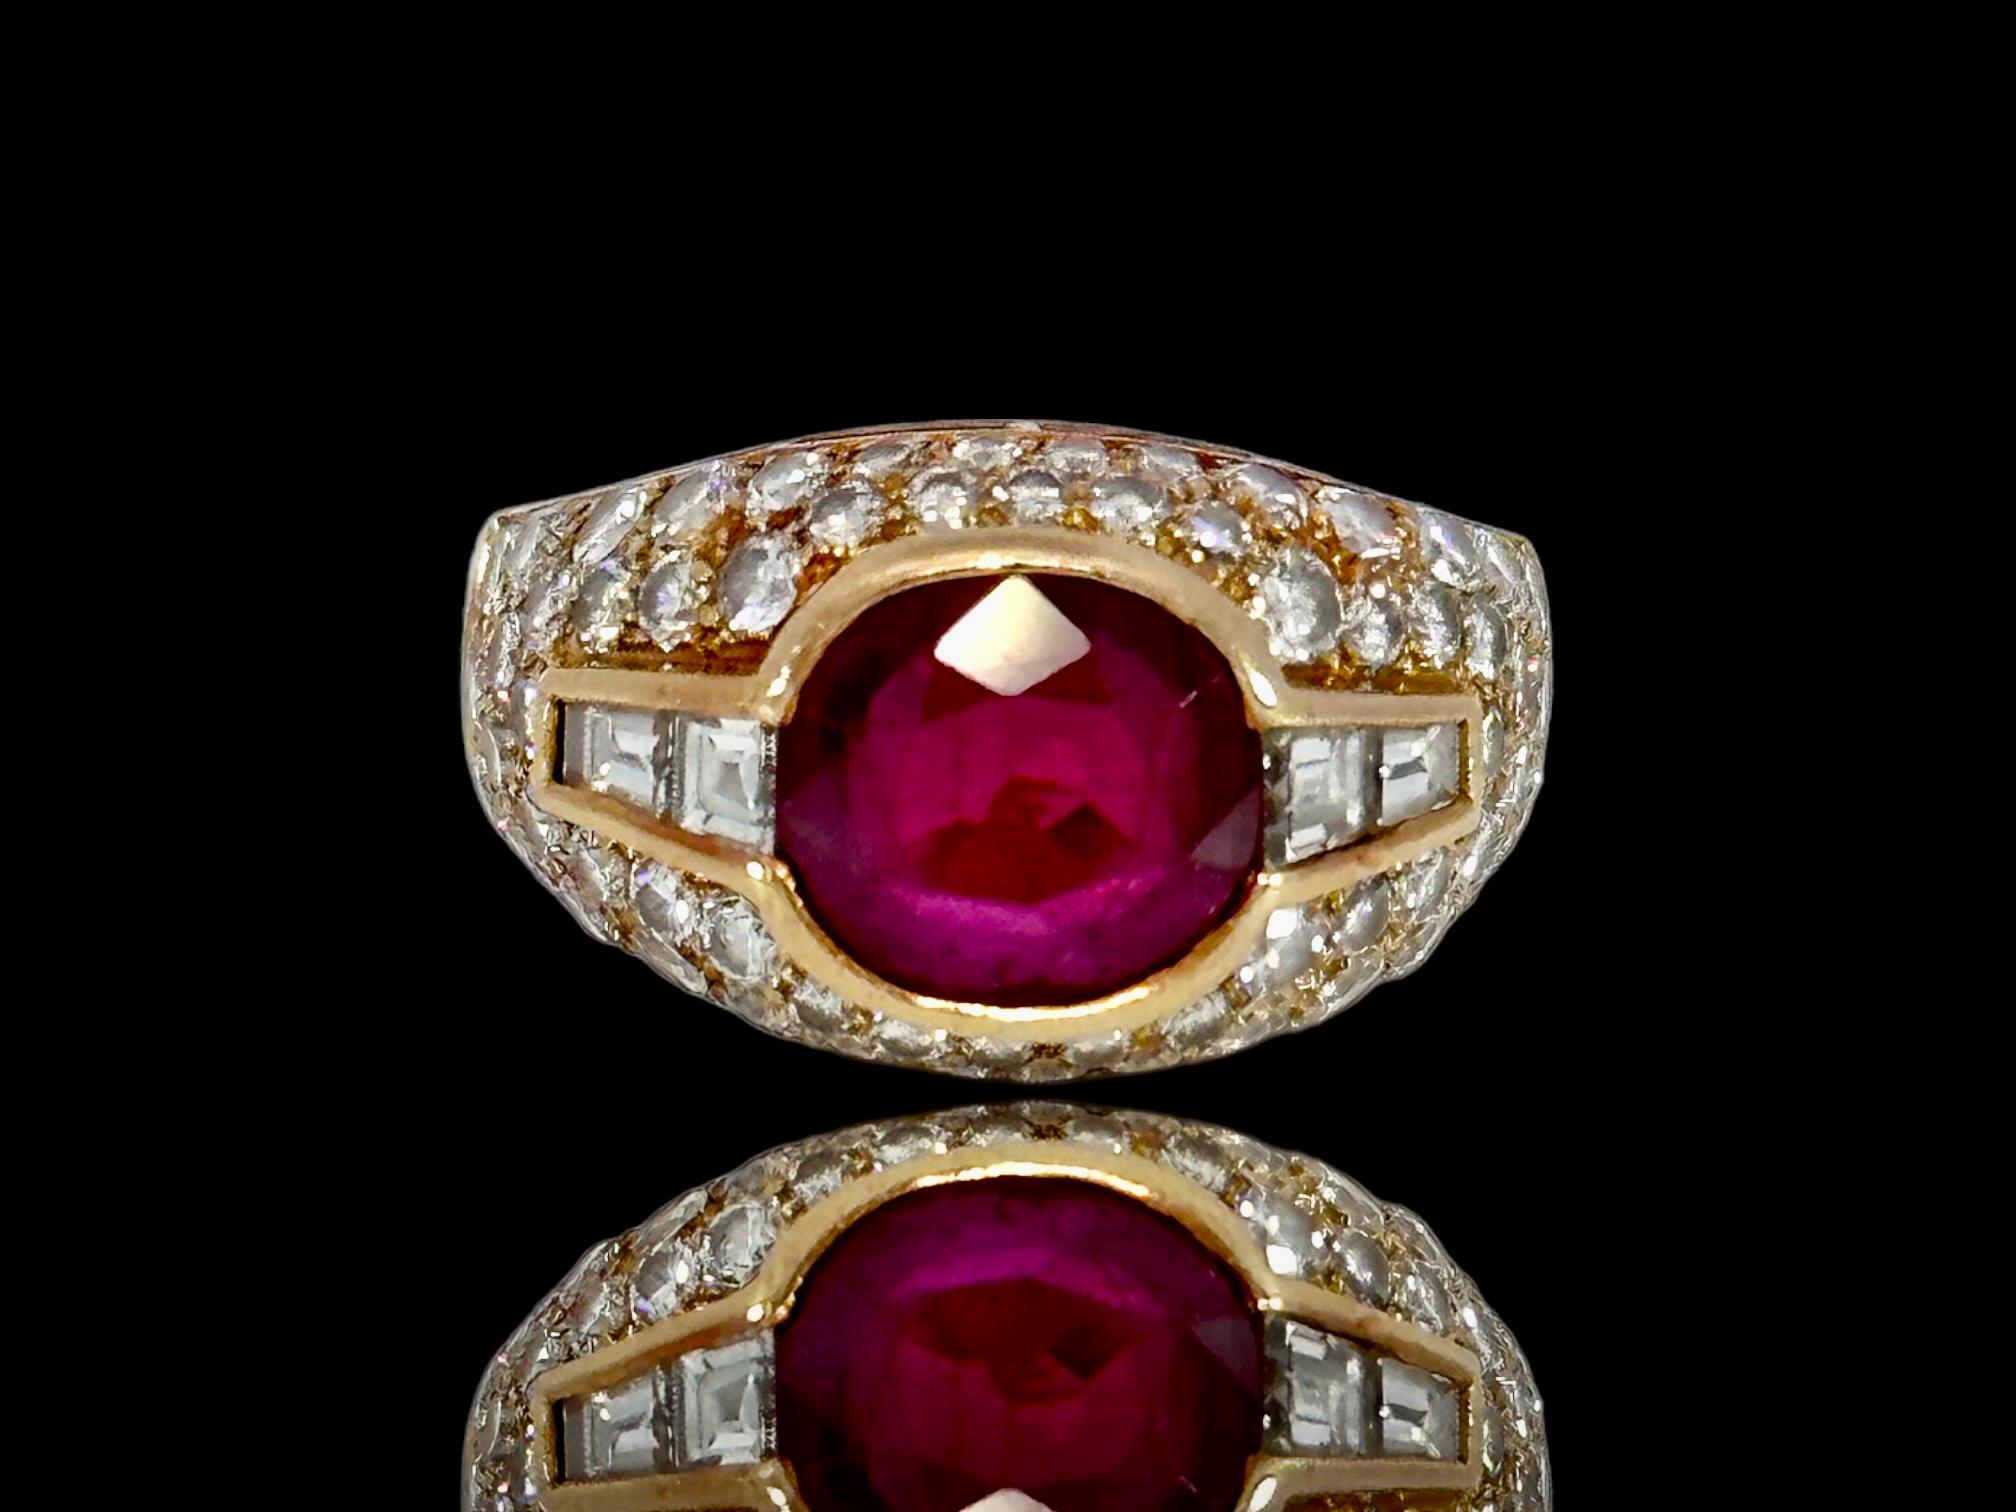 Bvlgari Trombino 18kt Yellow Gold Ring With 2.09ct Ruby and 1.12ct Diamonds from Estate Sultan Qaboos Bin Said of Oman

Comes with GRS certificate

Ruby: Natural red ruby, brilliant cut, oval shape 2.09ct, Origin Siam Thailand 

Diamonds: brilliant